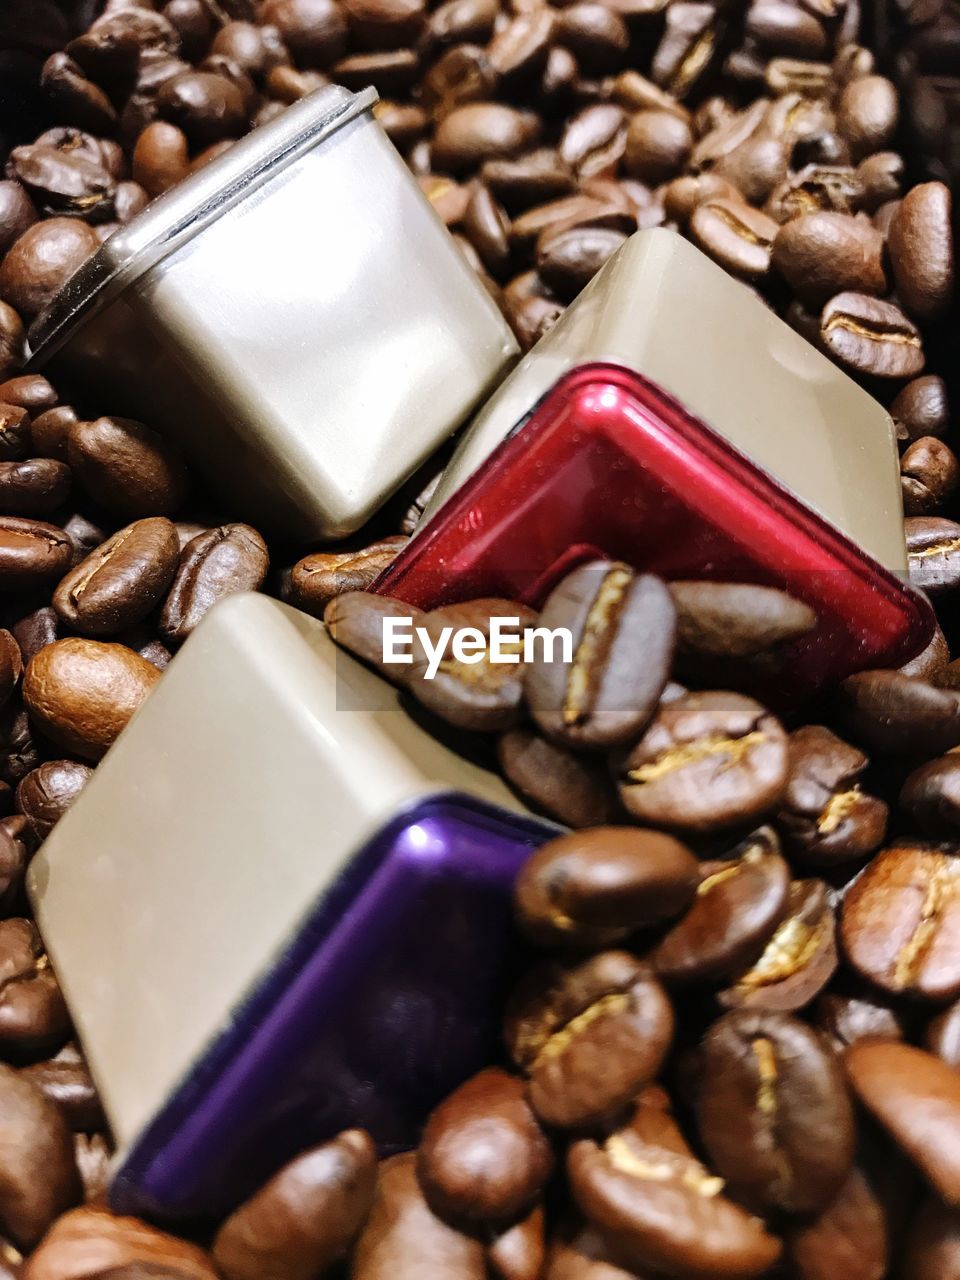 CLOSE-UP OF ROASTED COFFEE BEANS IN CONTAINER